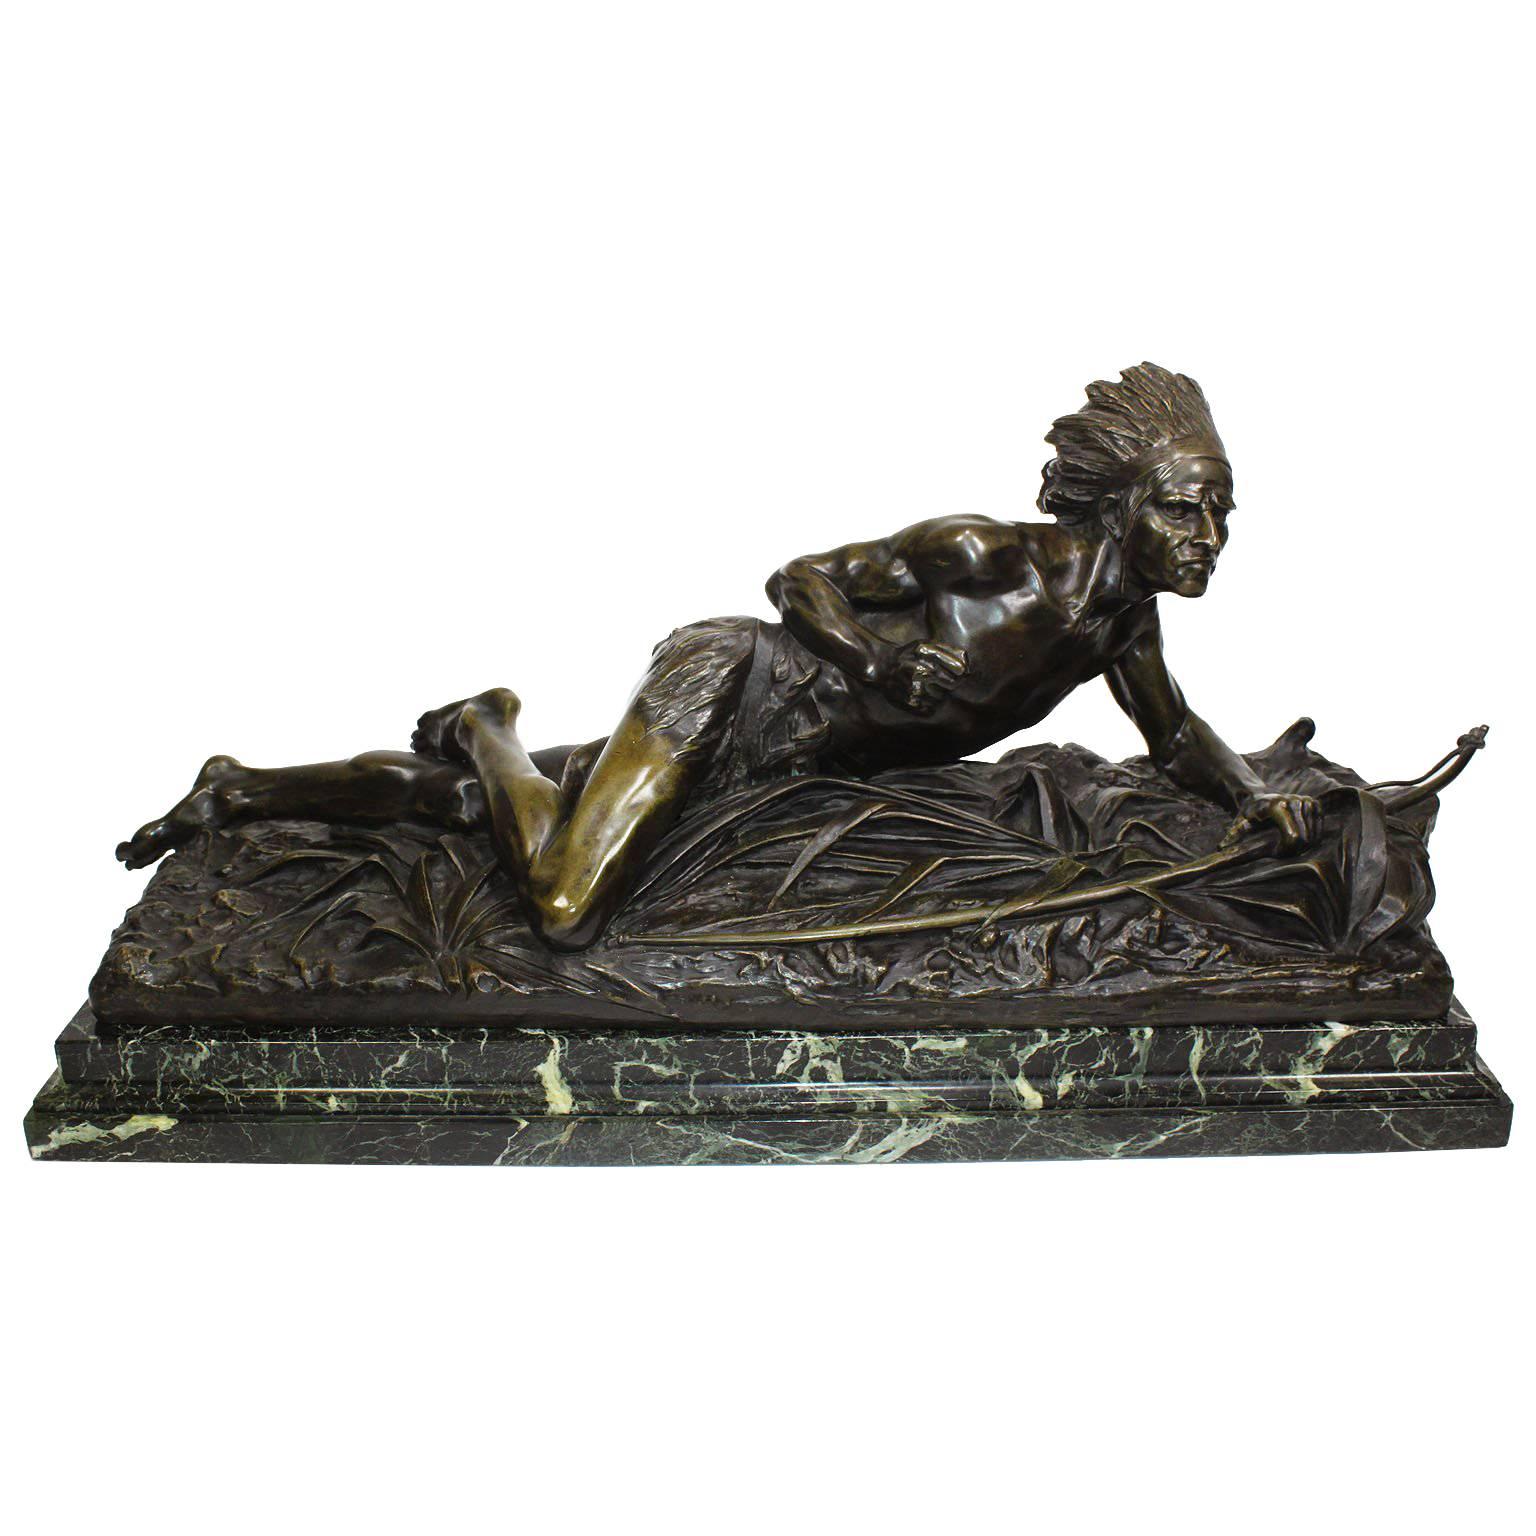 French Bronze Sculpture "Crouching Native American Indian" E. Drouot